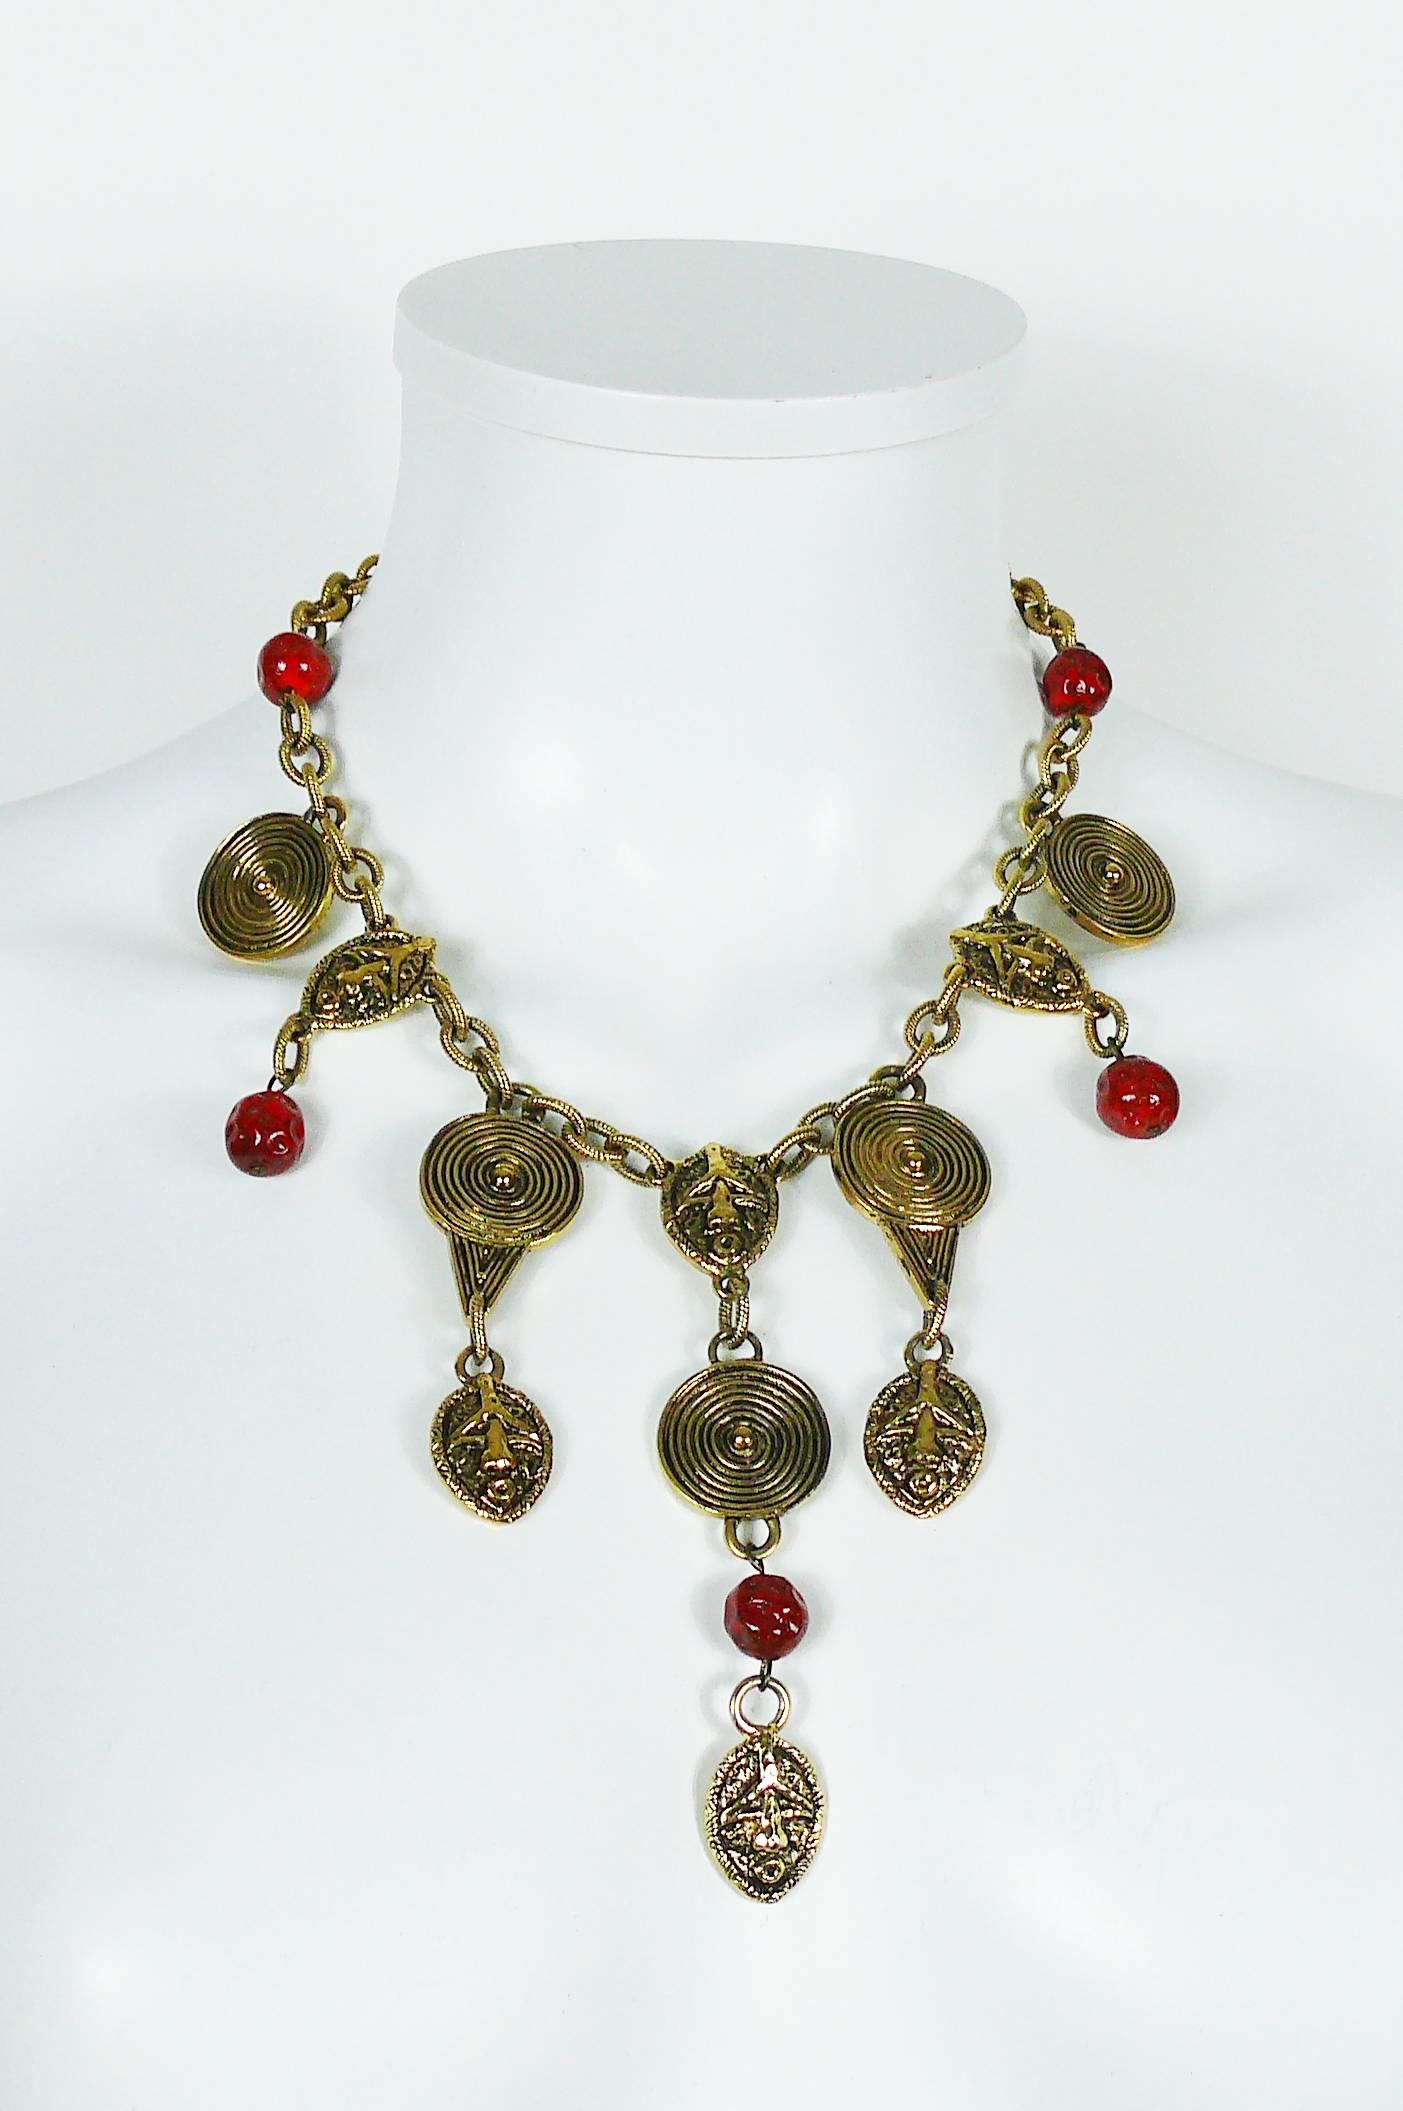 GUY LAROCHE vintage antiqued gold tone African inspired necklace featuring discs, masks and faux coral glass beads.

T-bar closure.

Indicative measurements : length approx. 46 cm (18.11 inches) / max. drop approx. 10 cm (3.94 inches).

JEWELRY